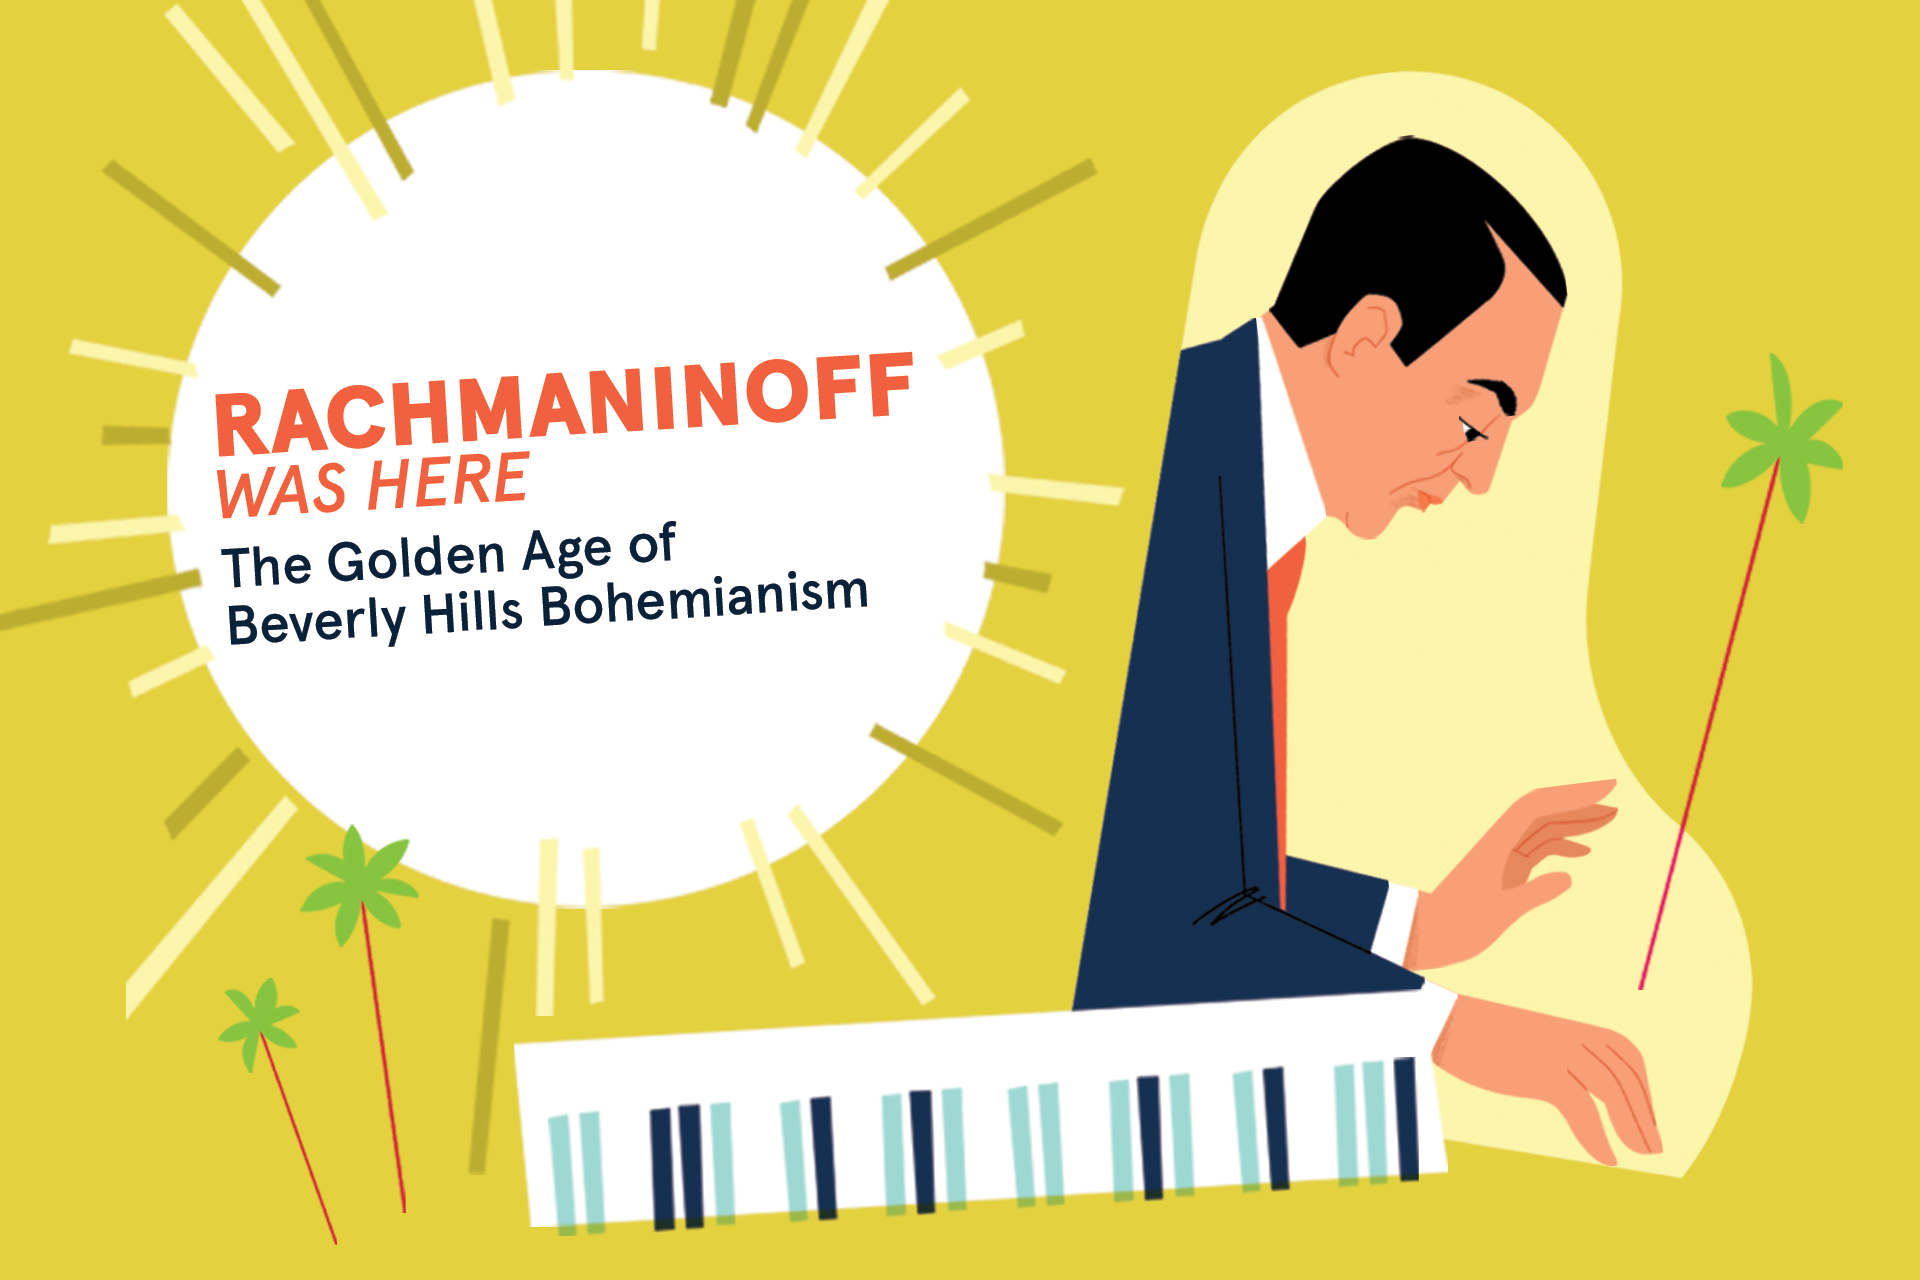 Rachmaninoff Was Here: The Golden Age of Beverly Hills Bohemianism, 3 COMMUNITY EVENTS • FEB 2-18